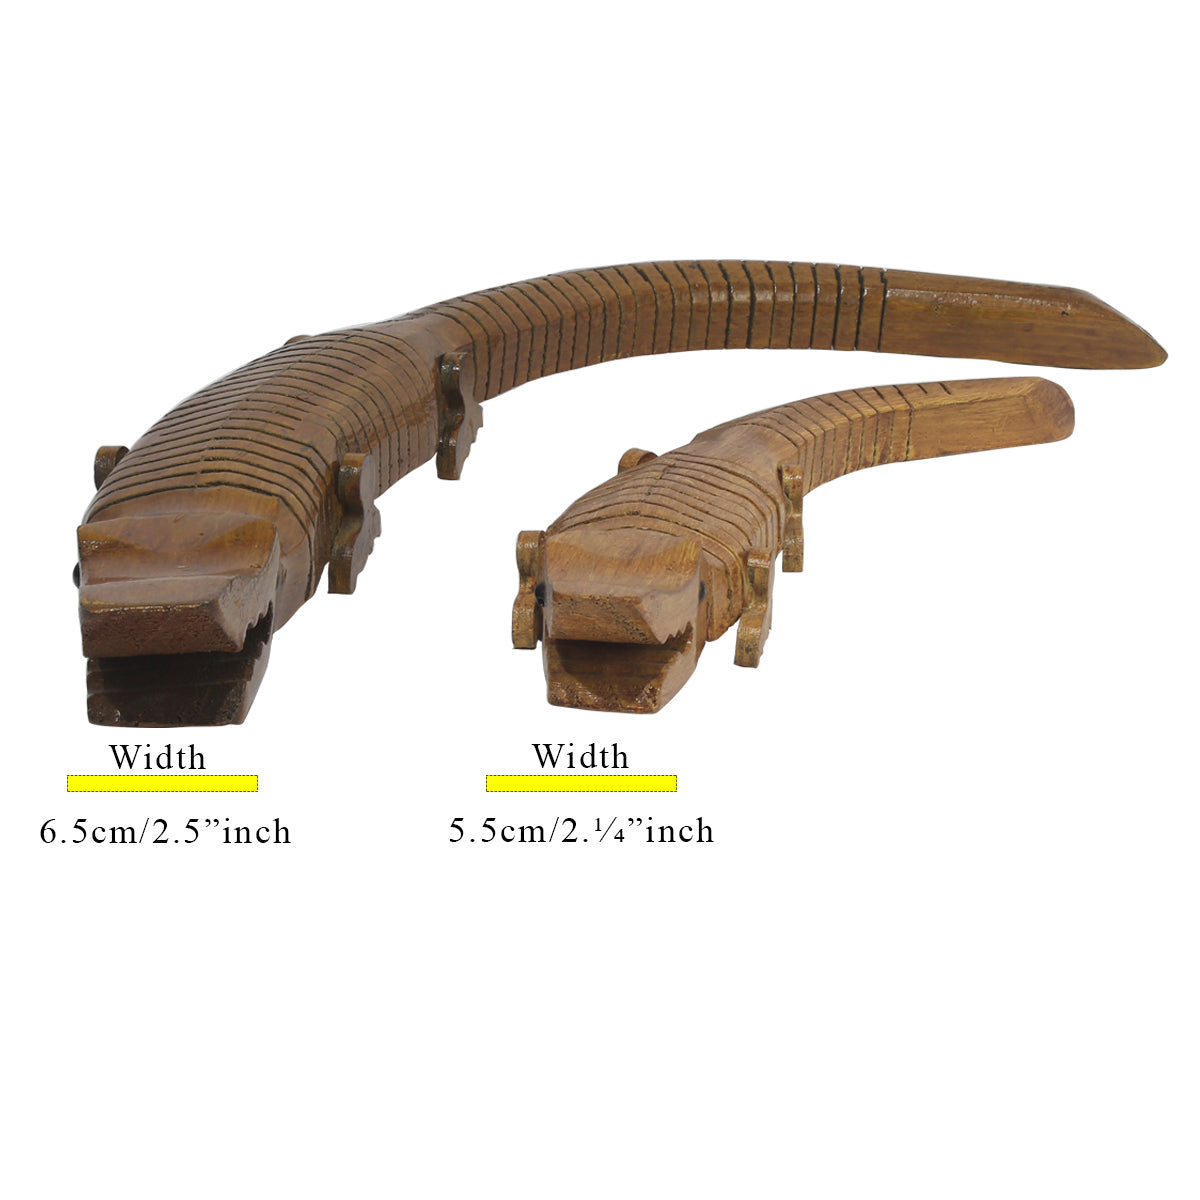 Wooden Crocodile Showpiece for Home Decor and Toy for Kids (Brown)